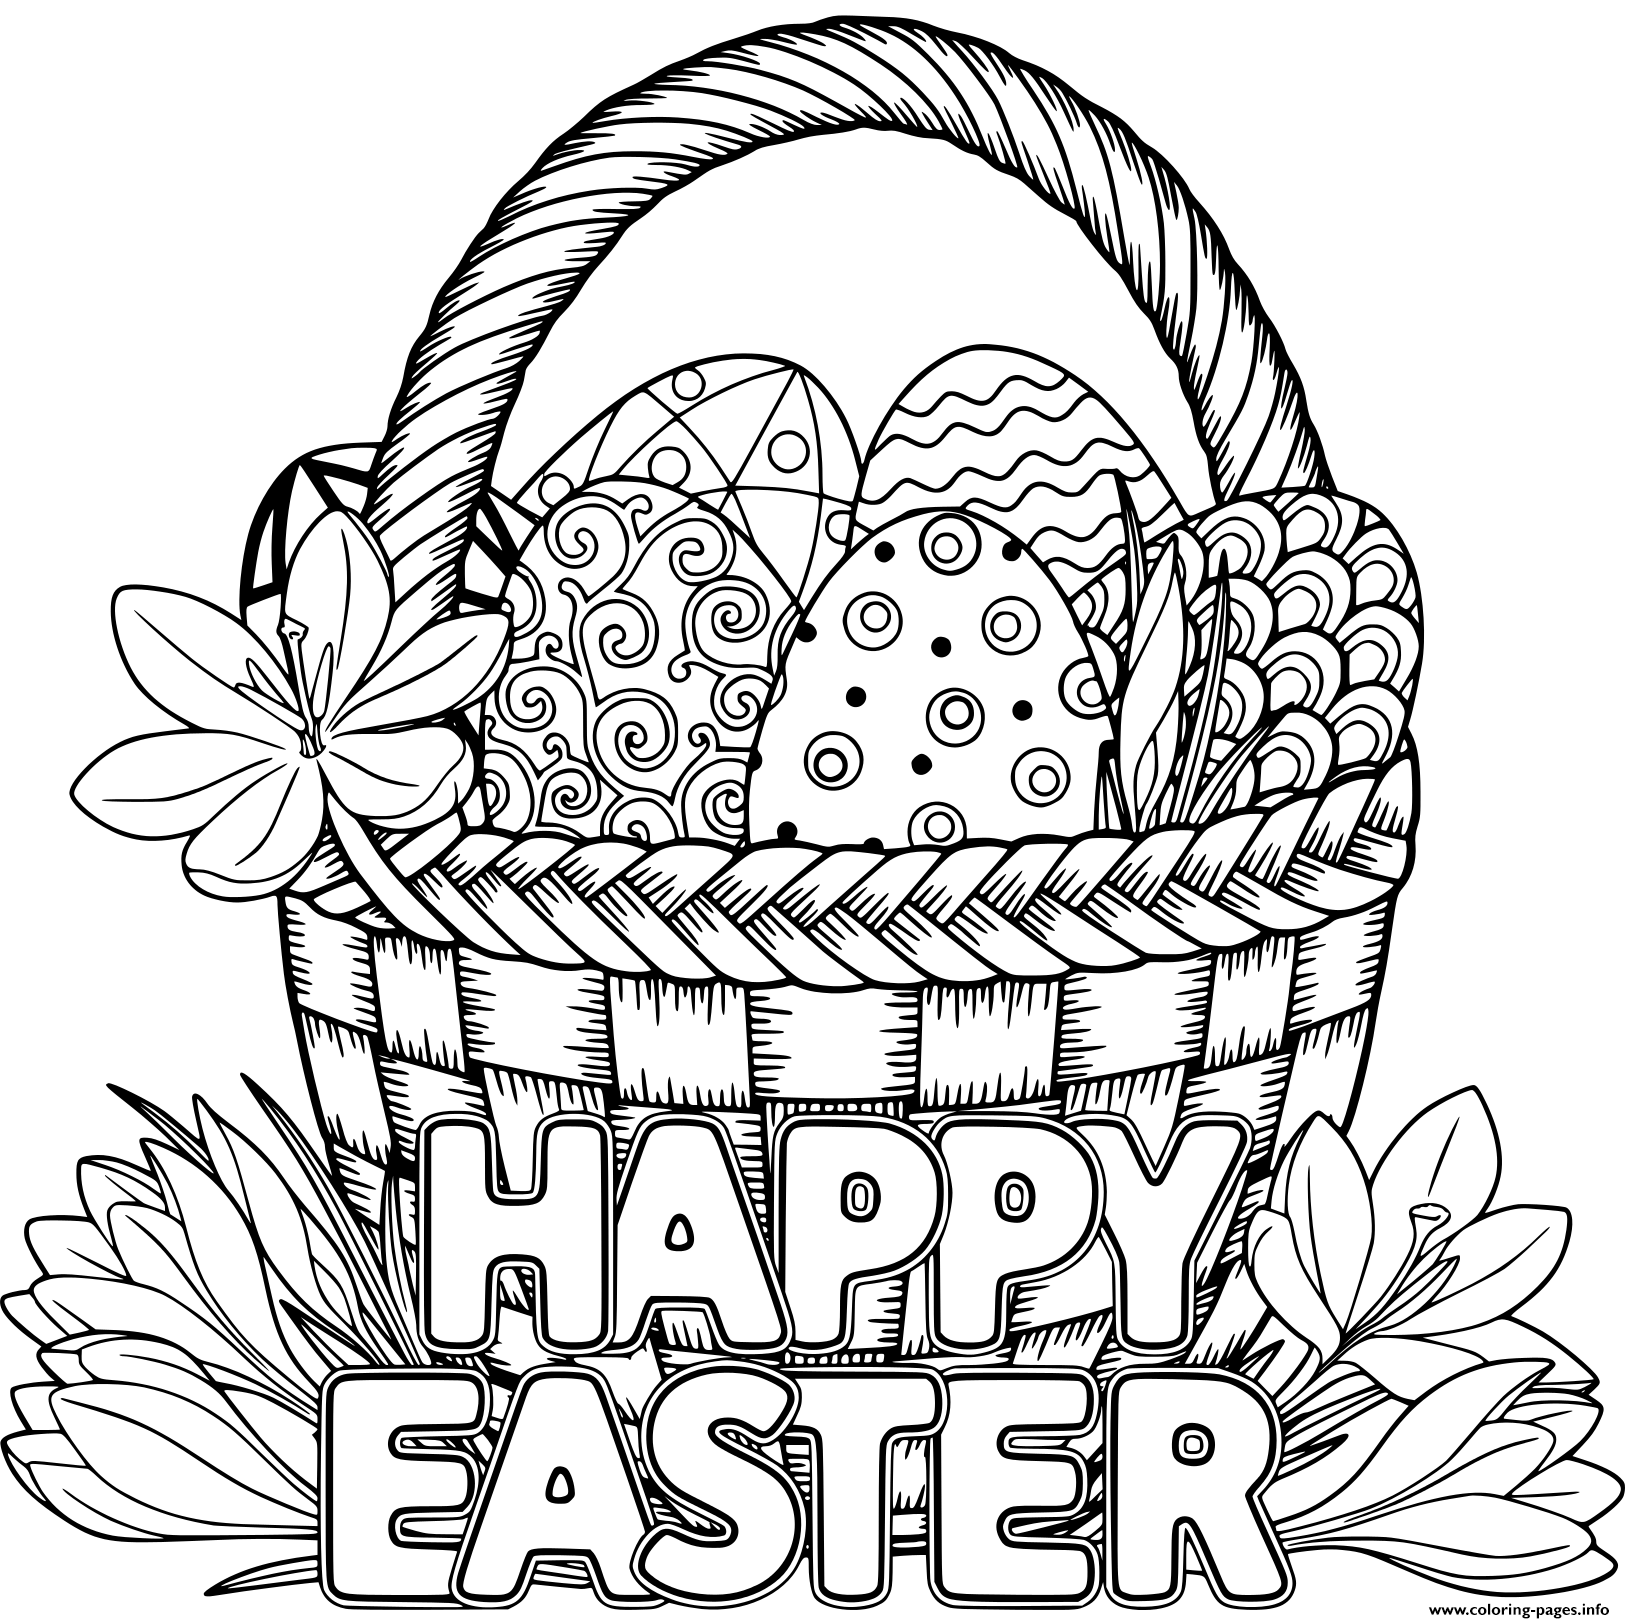 Coloring Book Basket full of Easter eggs to print and online